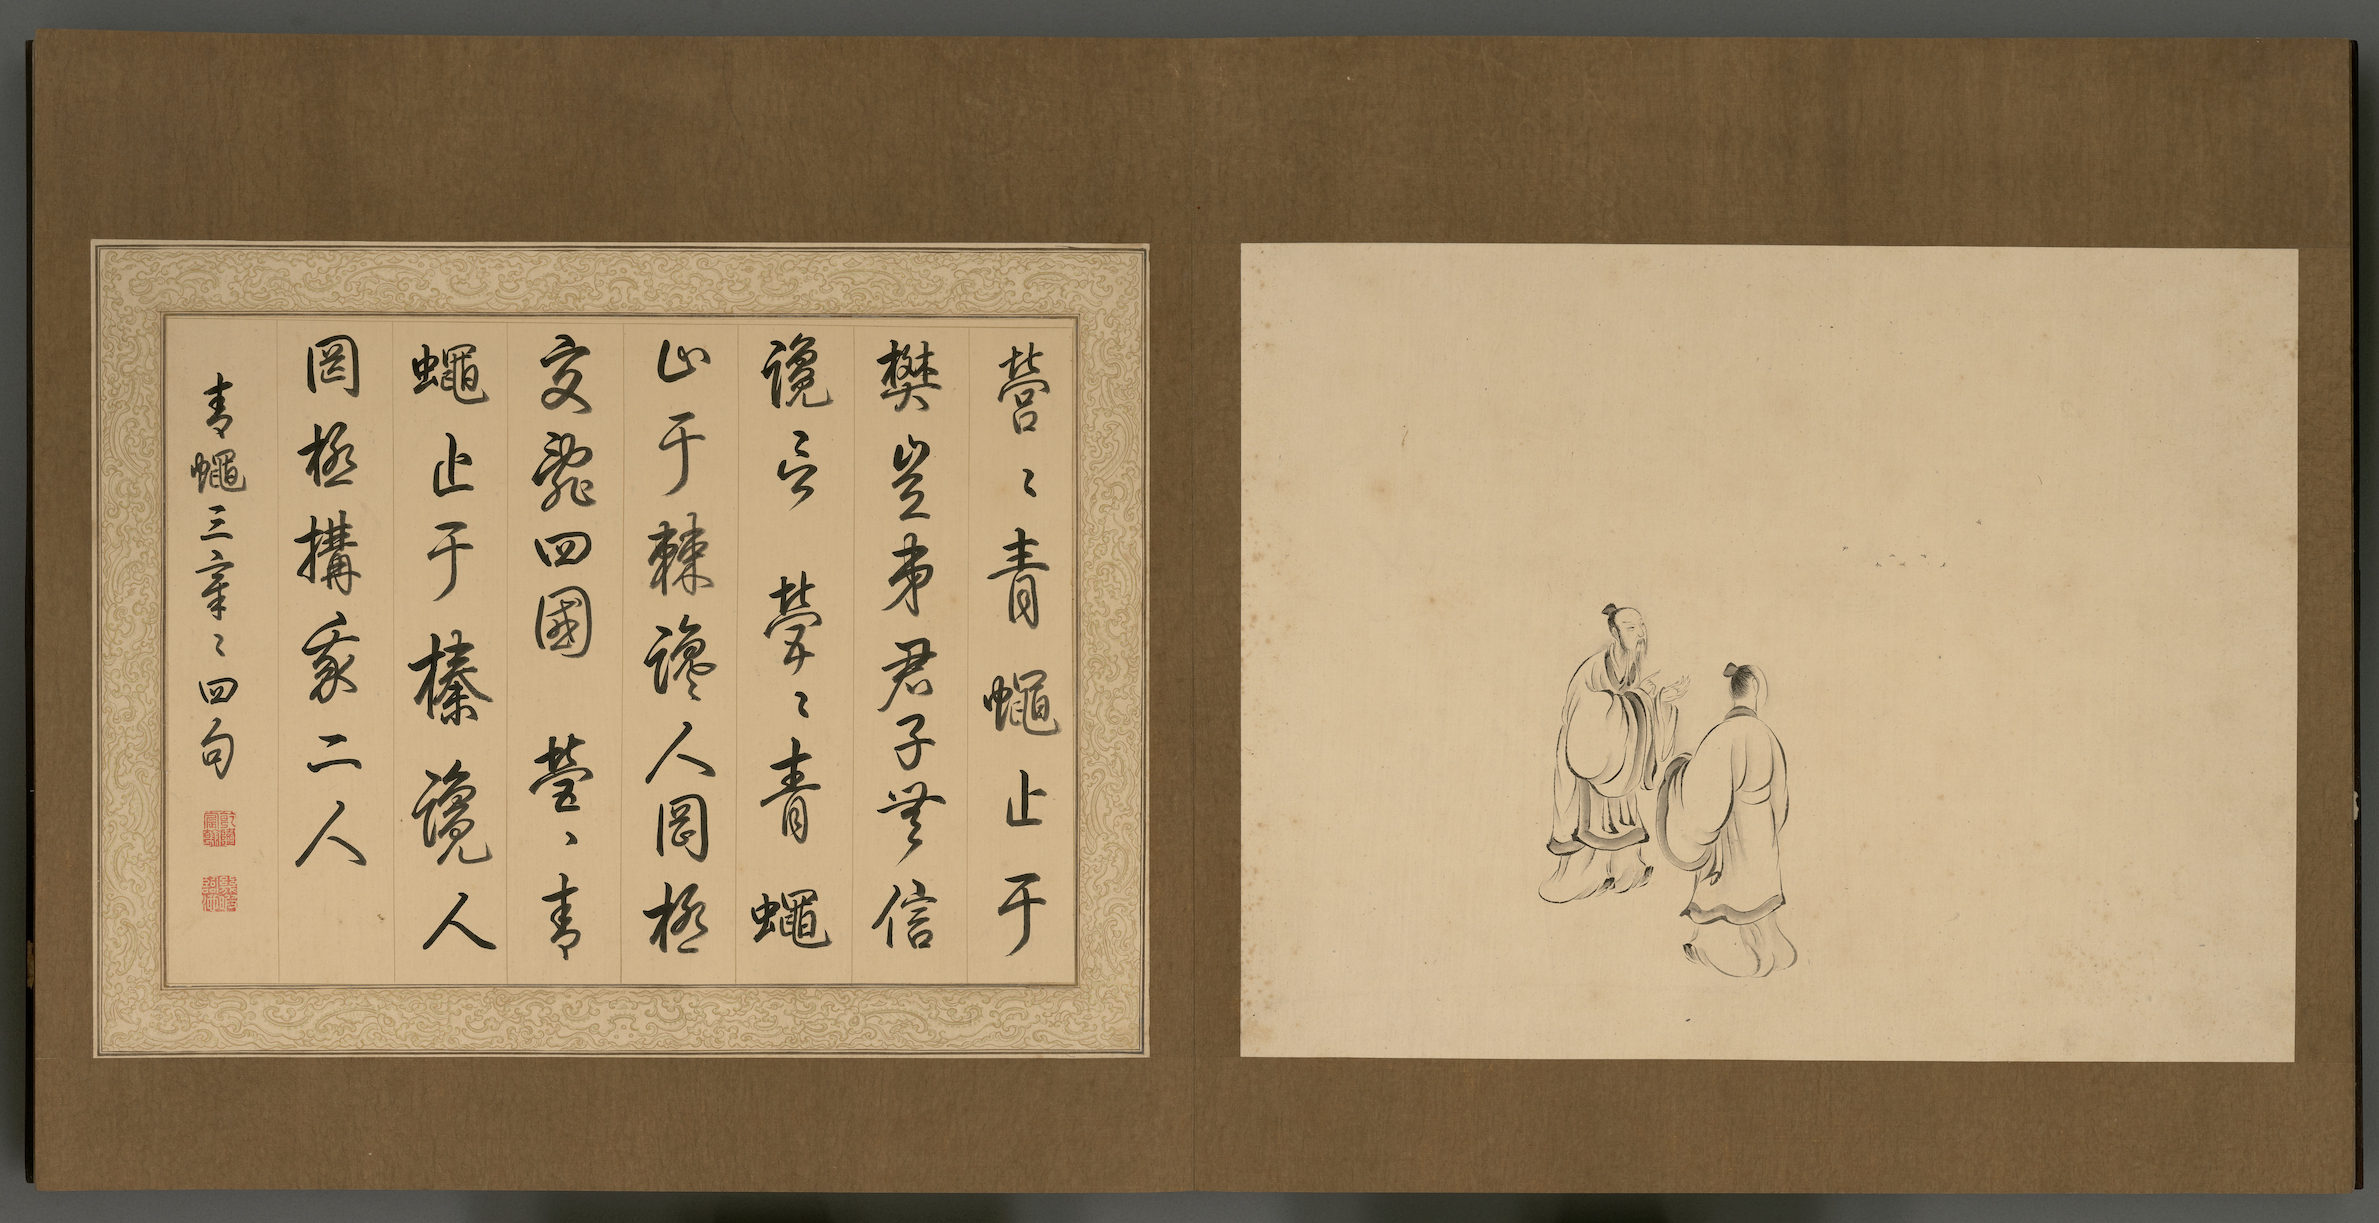 Qing Dynasty Royal Pen Book of Songs "Three Chapters of Blueflies"